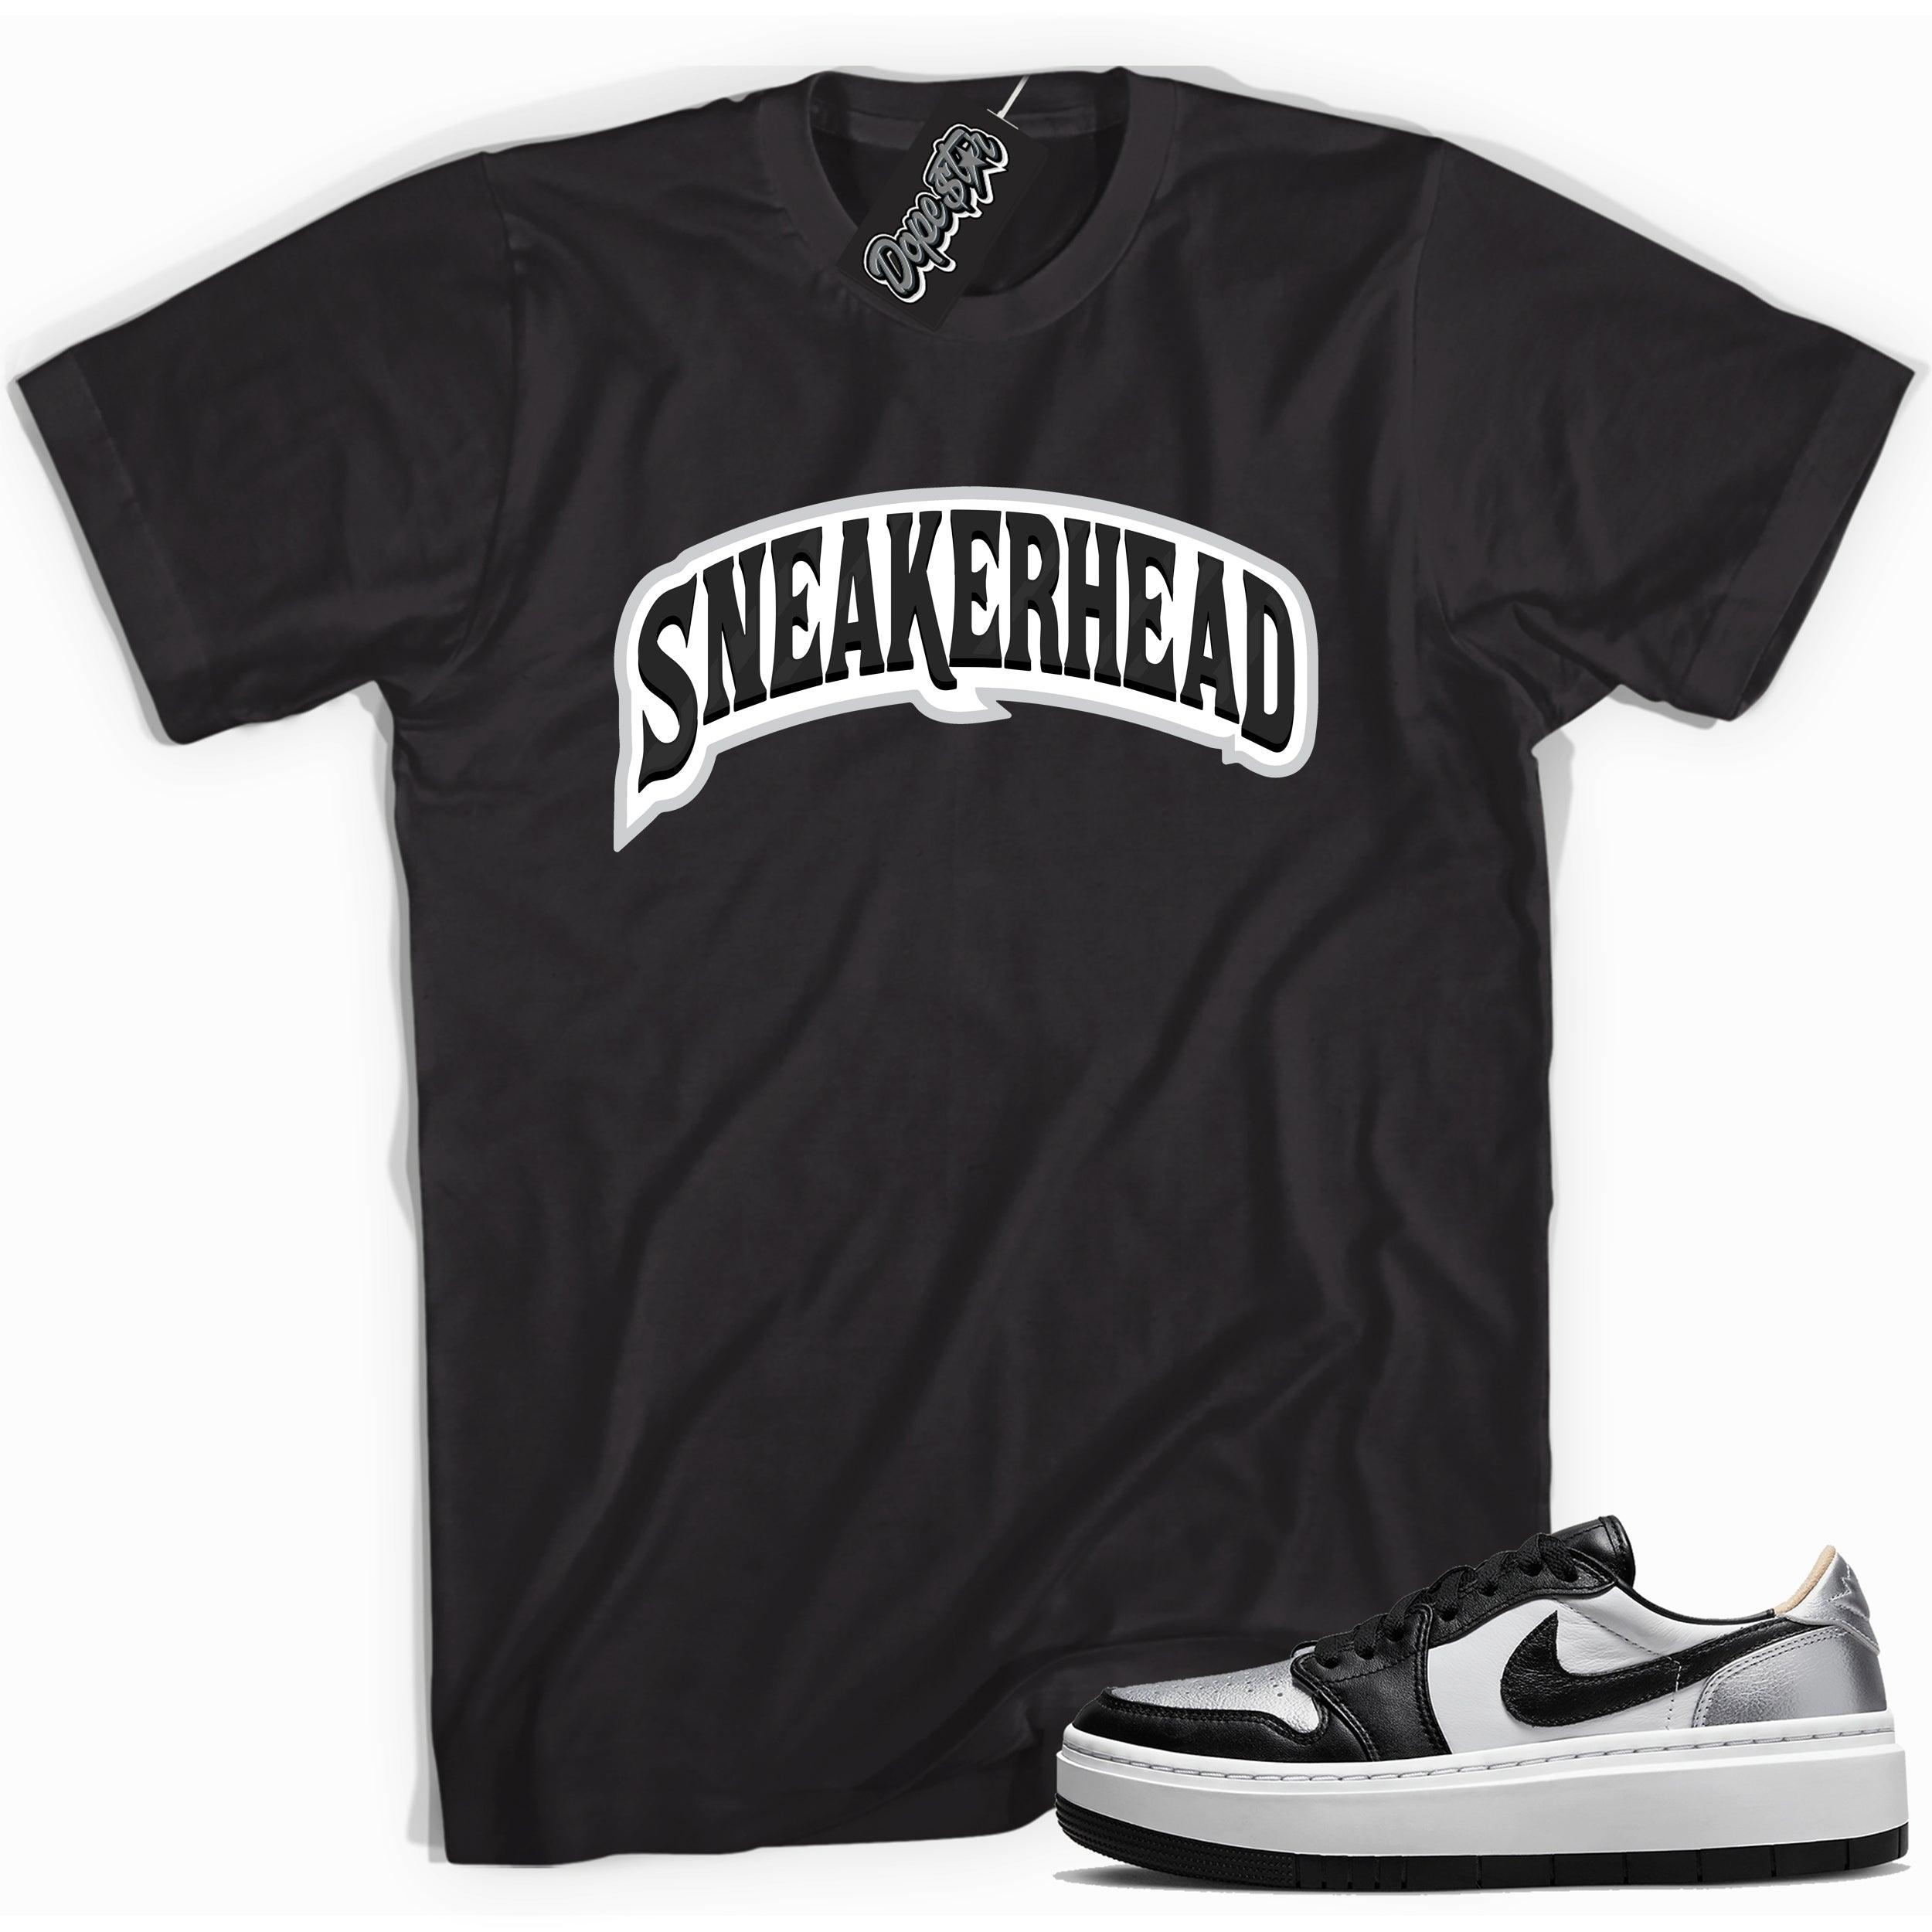 Cool black graphic tee with 'sneakerhead' print, that perfectly matches Air Jordan 1 Elevate Low SE Silver Toe sneakers.